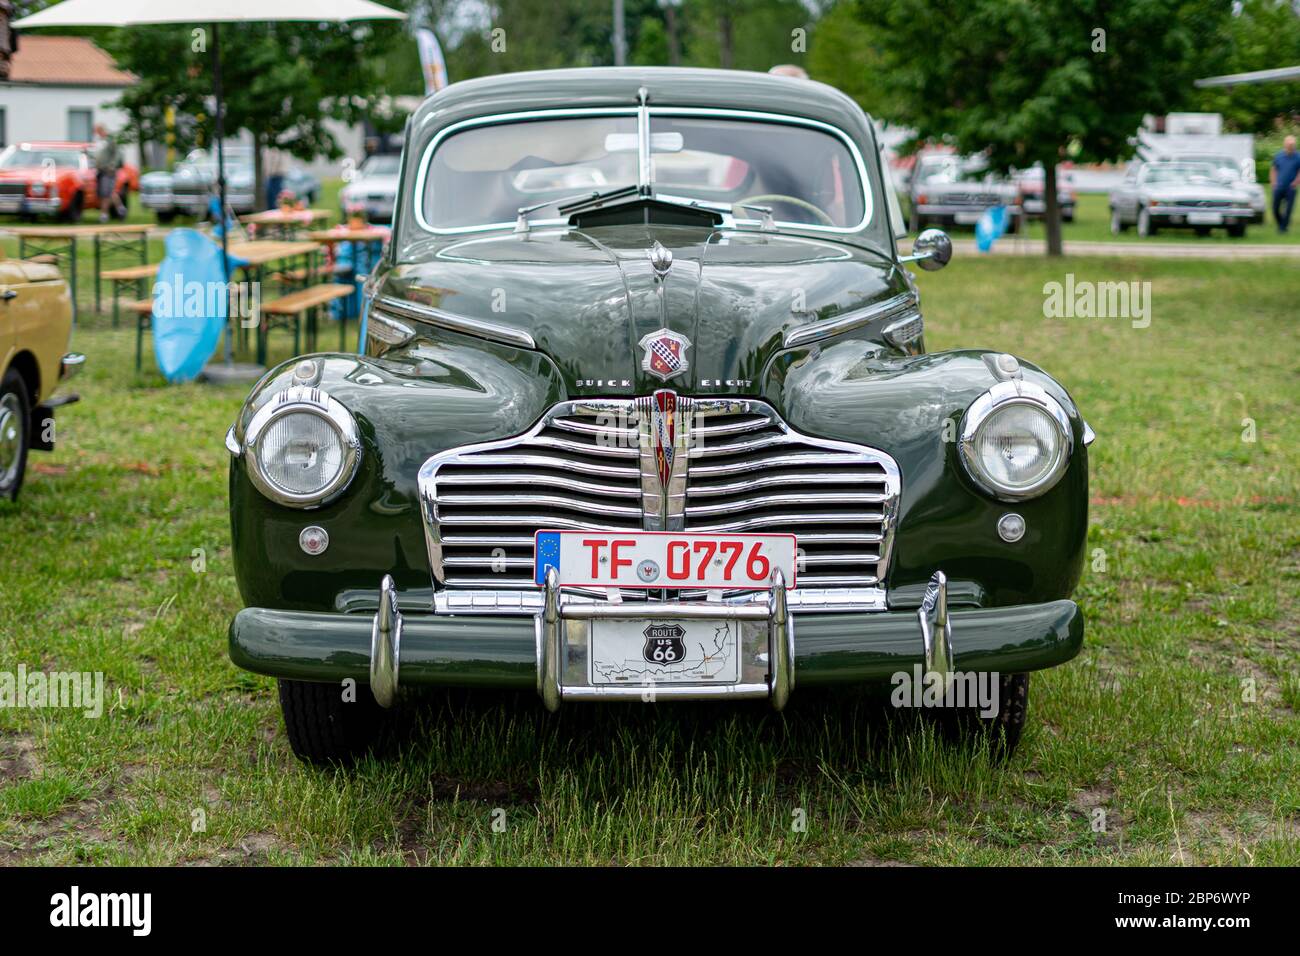 PAAREN IM GLIEN, GERMANY - JUNE 08, 2019: Full-size car Buick Super coupe. Die Oldtimer Show 2019. Stock Photo